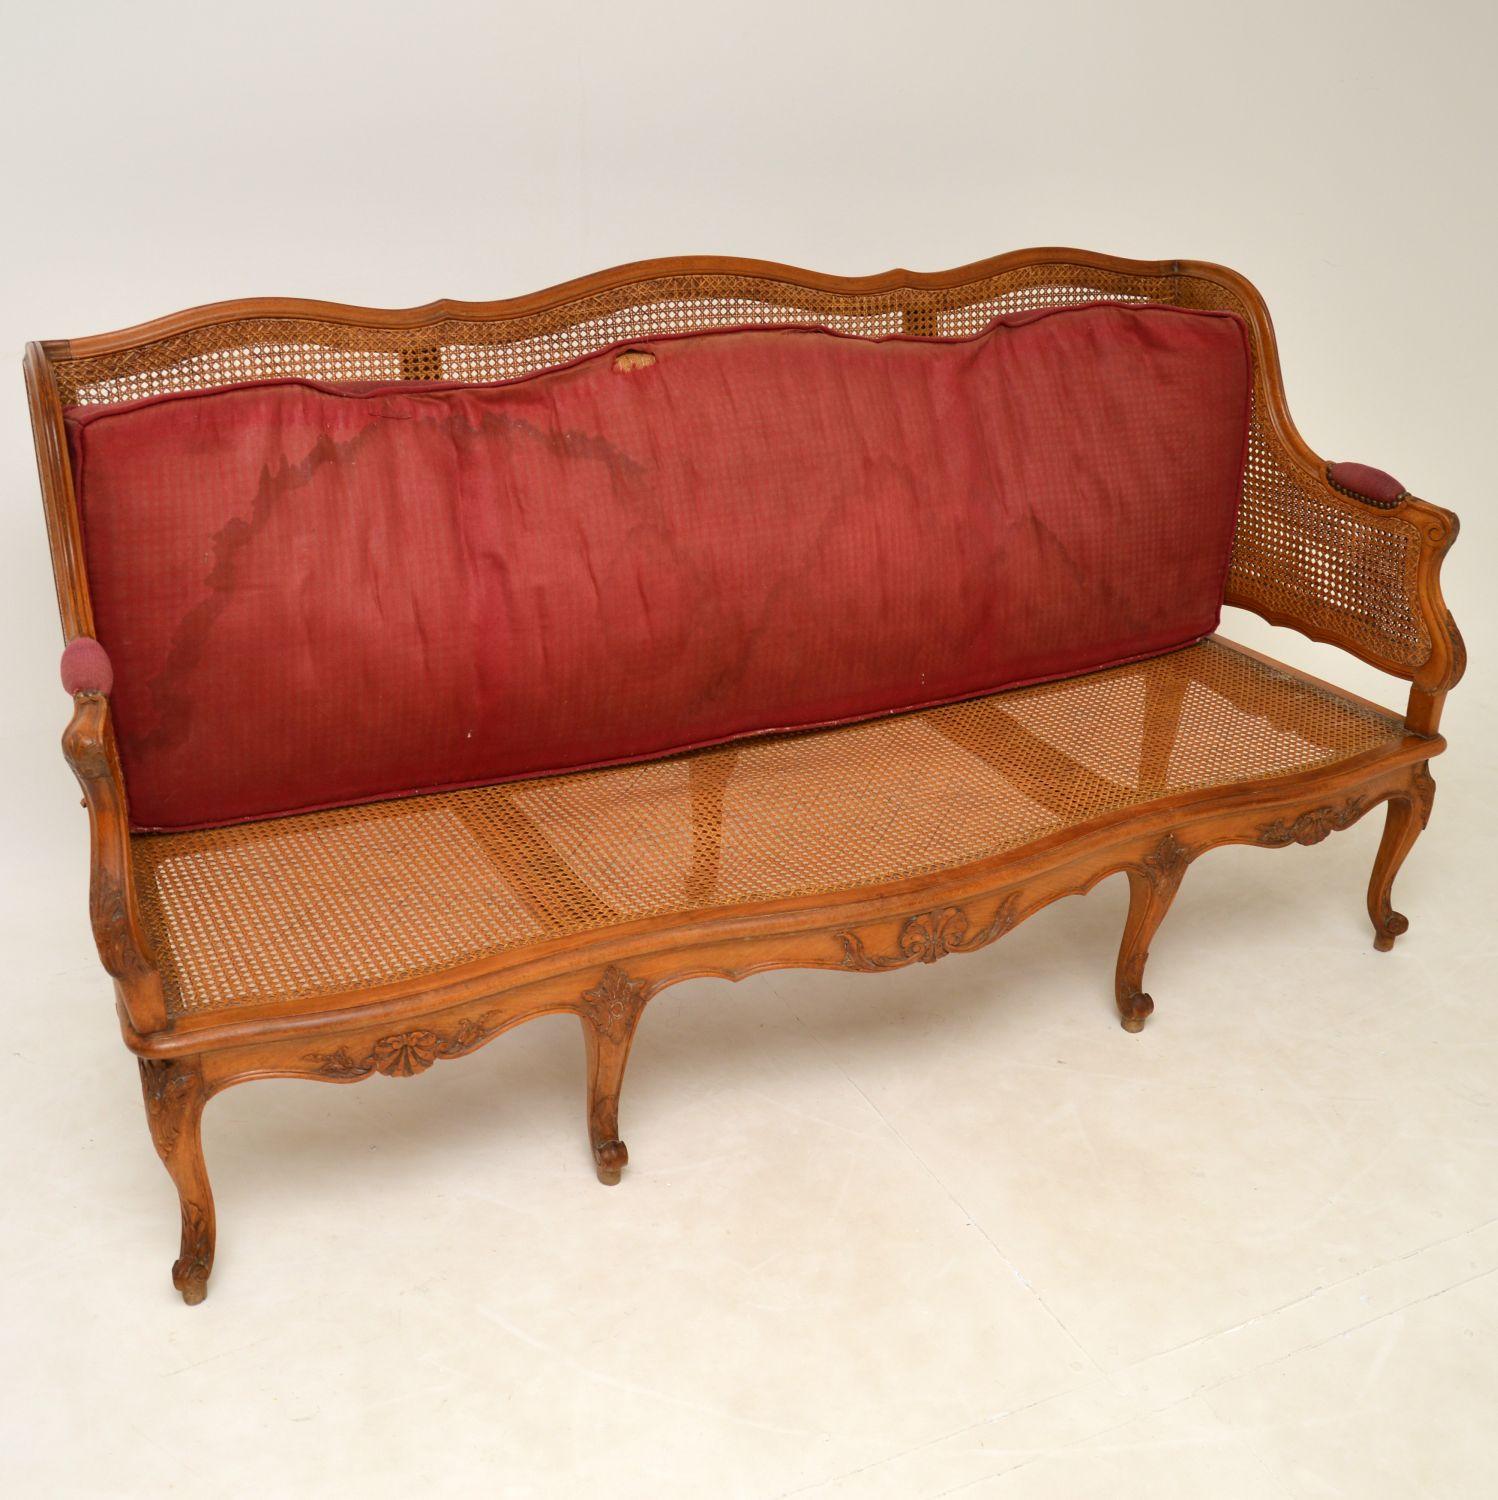 Late 19th Century Antique French Carved Walnut Bergere Sofa For Sale